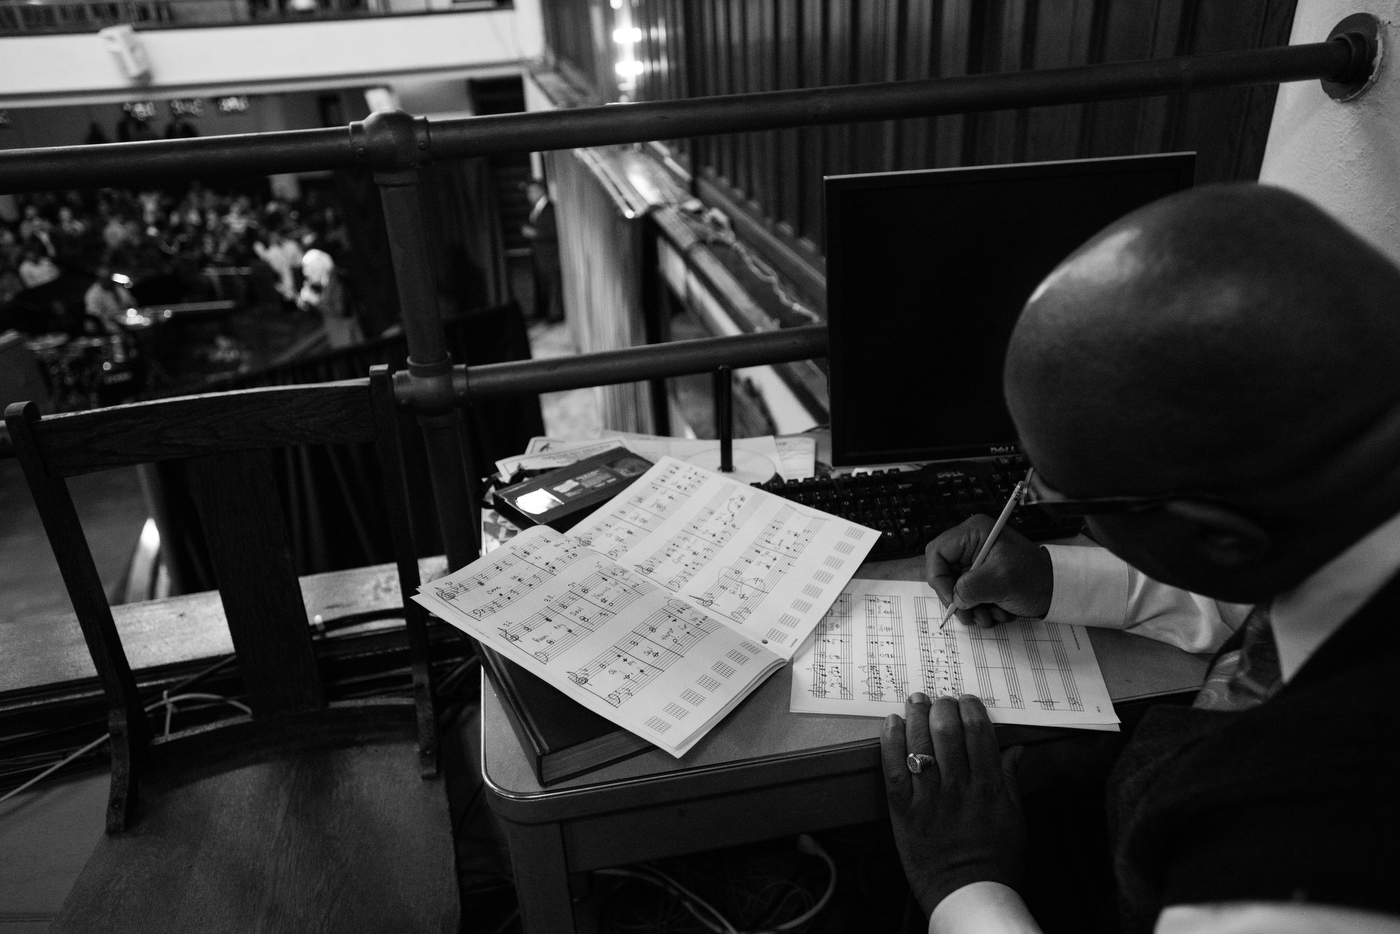  Theodore Thomas Jr., organist at Tindley Temple United Methodist Church, does arrangements as Democratic presidential candidate Bernie Sanders speaks at an African American Community Conversation town hall event in Philadelphia, Pennsylvania on Apri